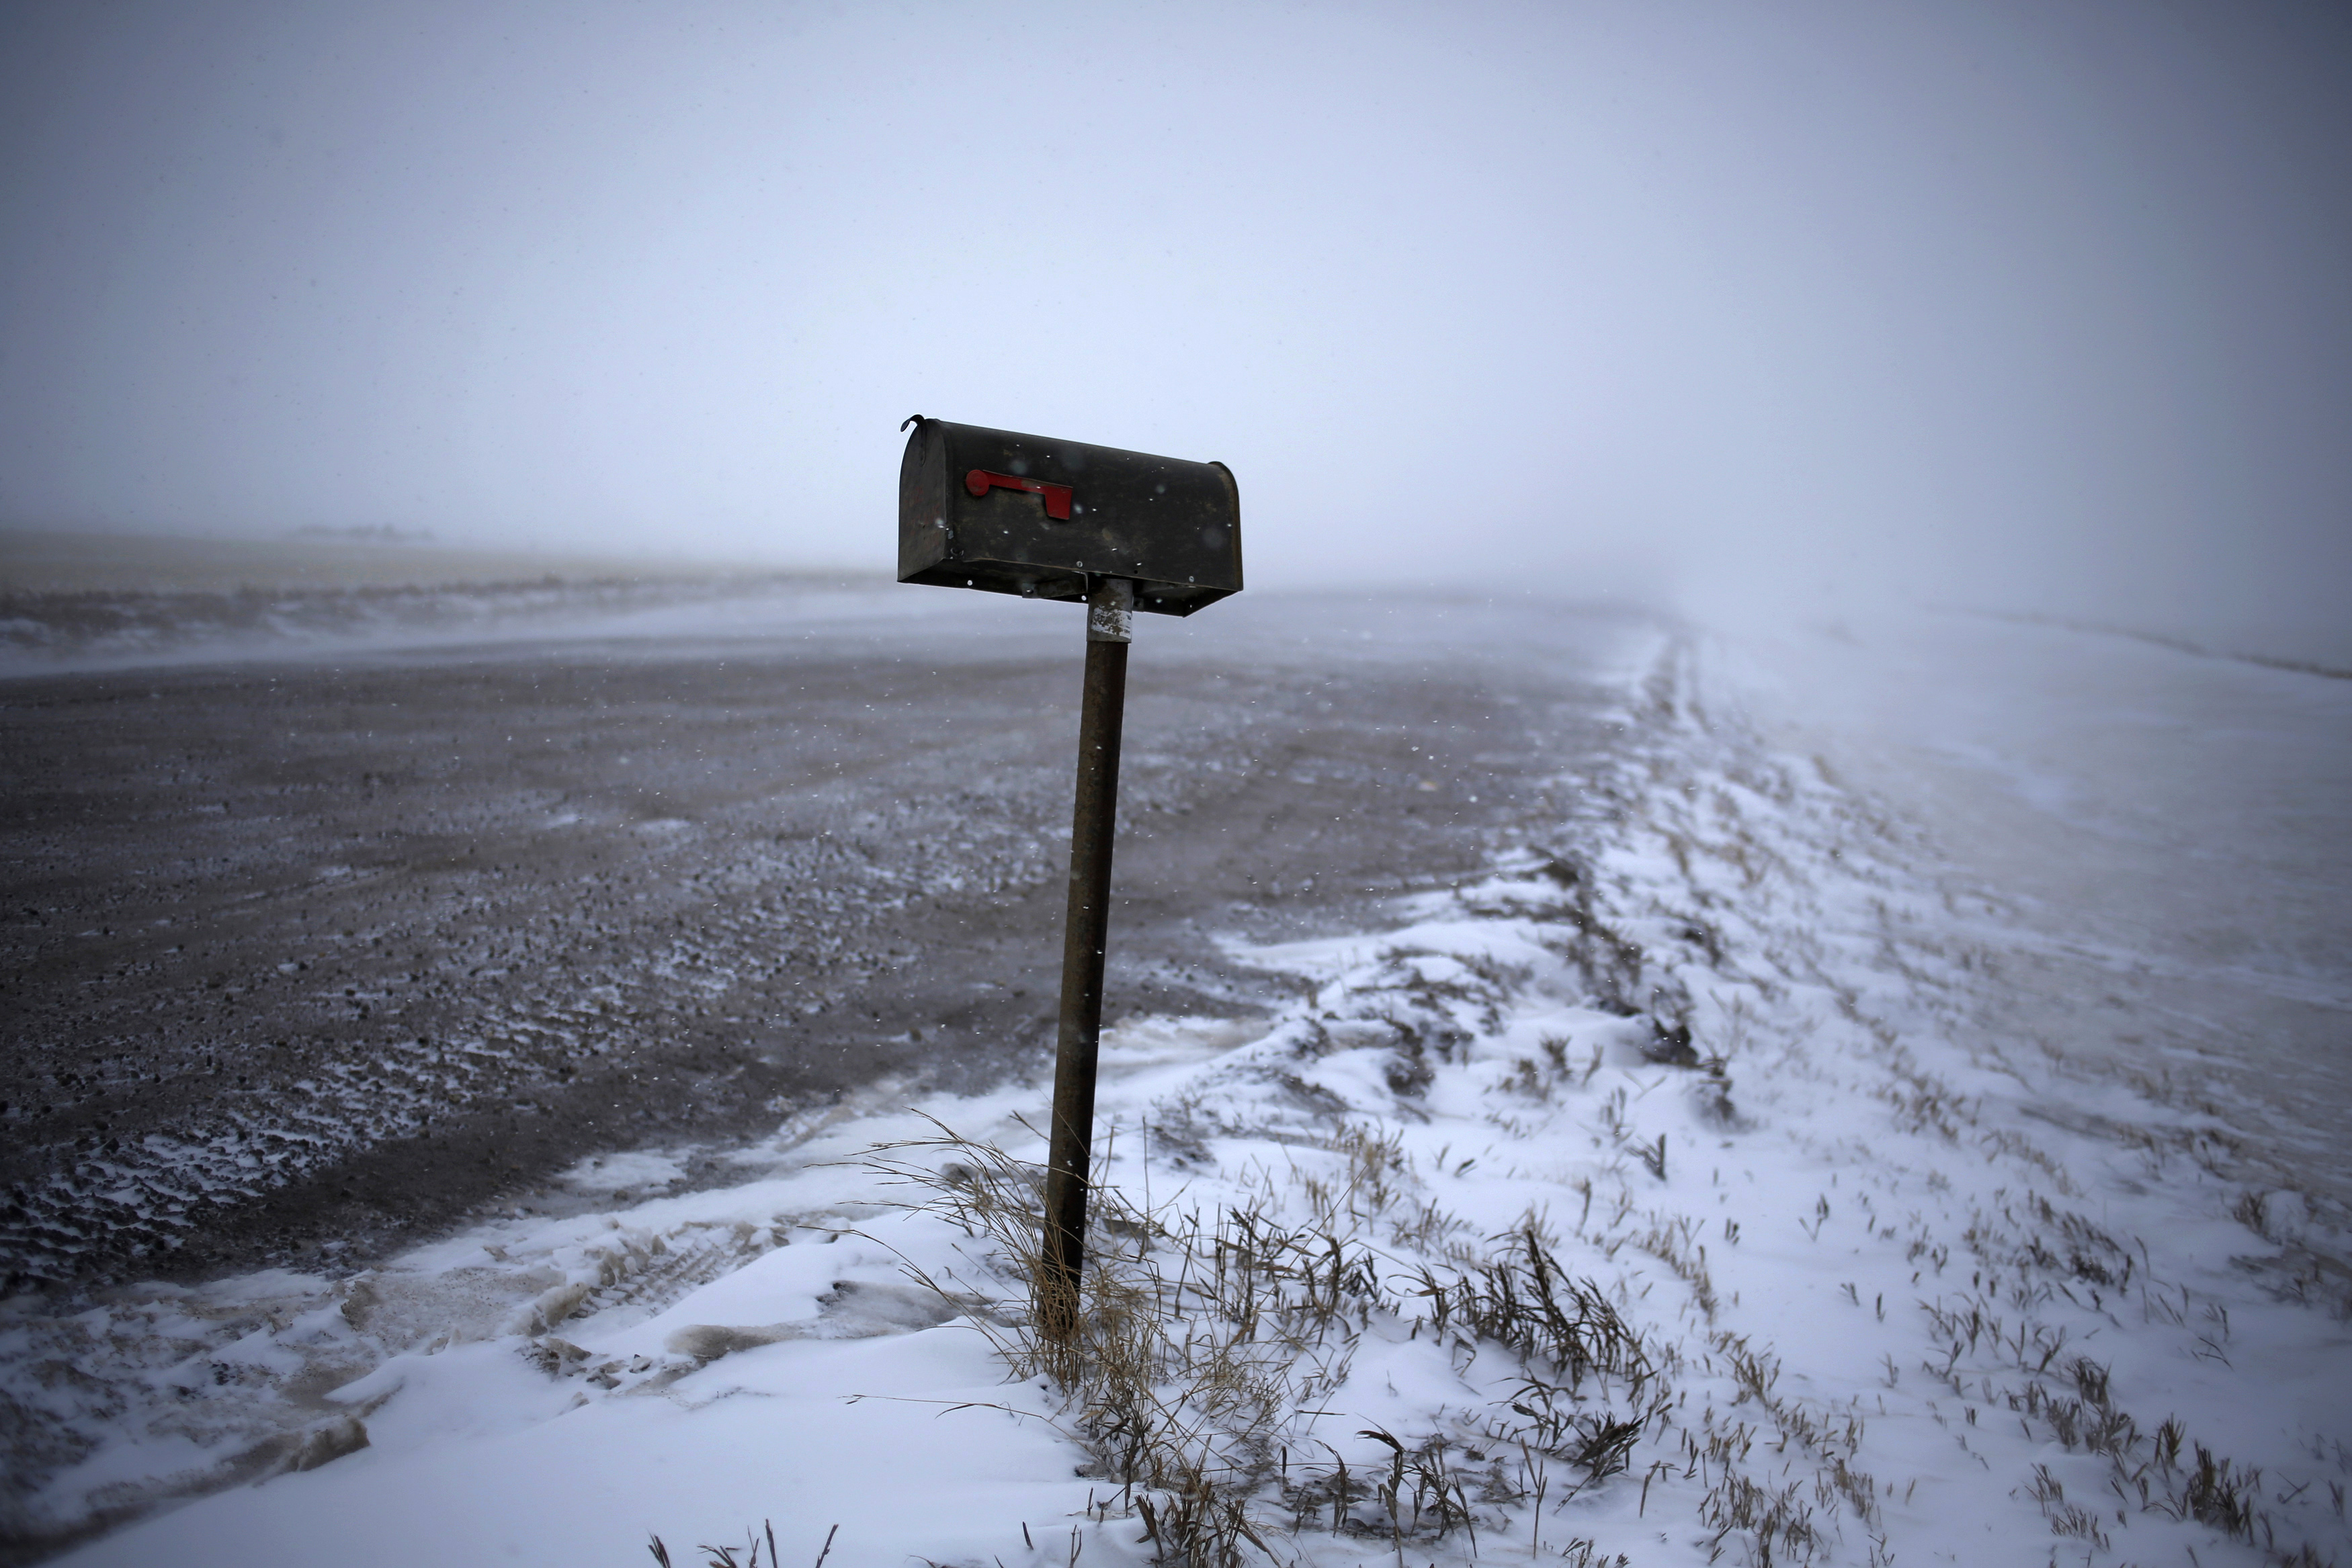 A mailbox is seen along a road during a snowstorm outside of Williston, North Dakota March 11, 2013.